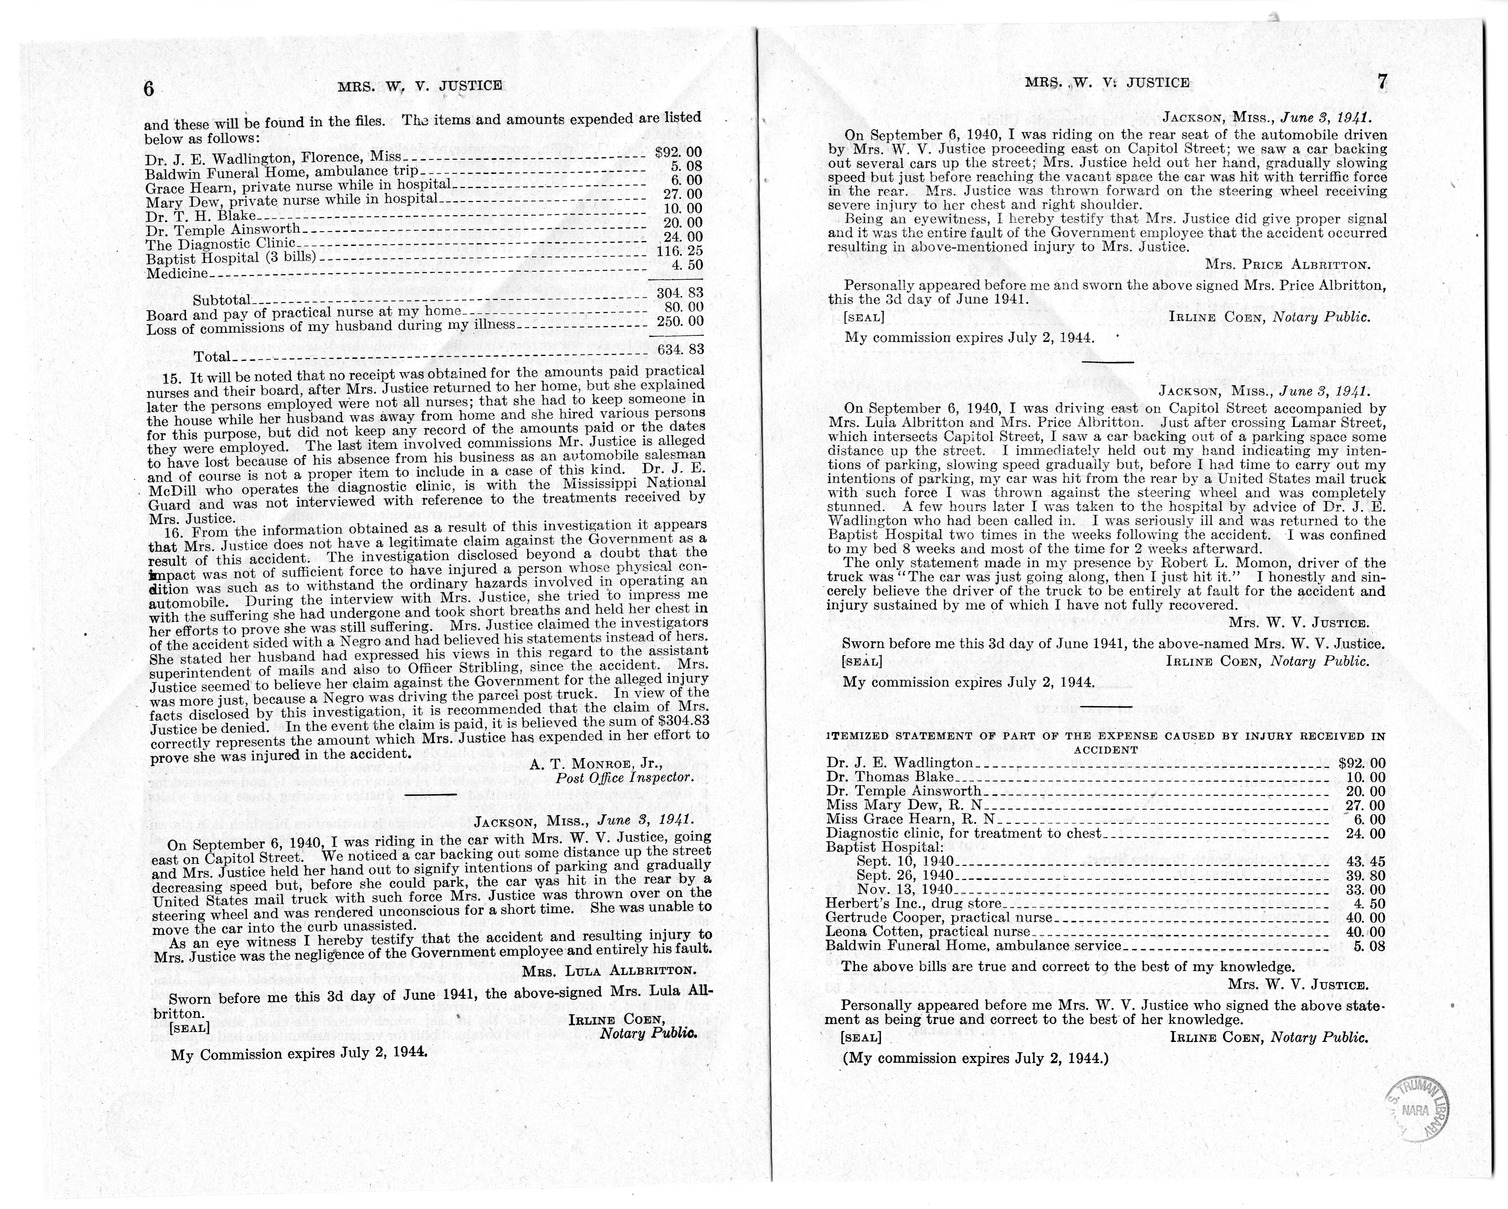 Memorandum from Frederick J. Bailey to M. C. Latta, H.R. 1483, For the Relief of Mrs. W. V. Justice, with Attachments